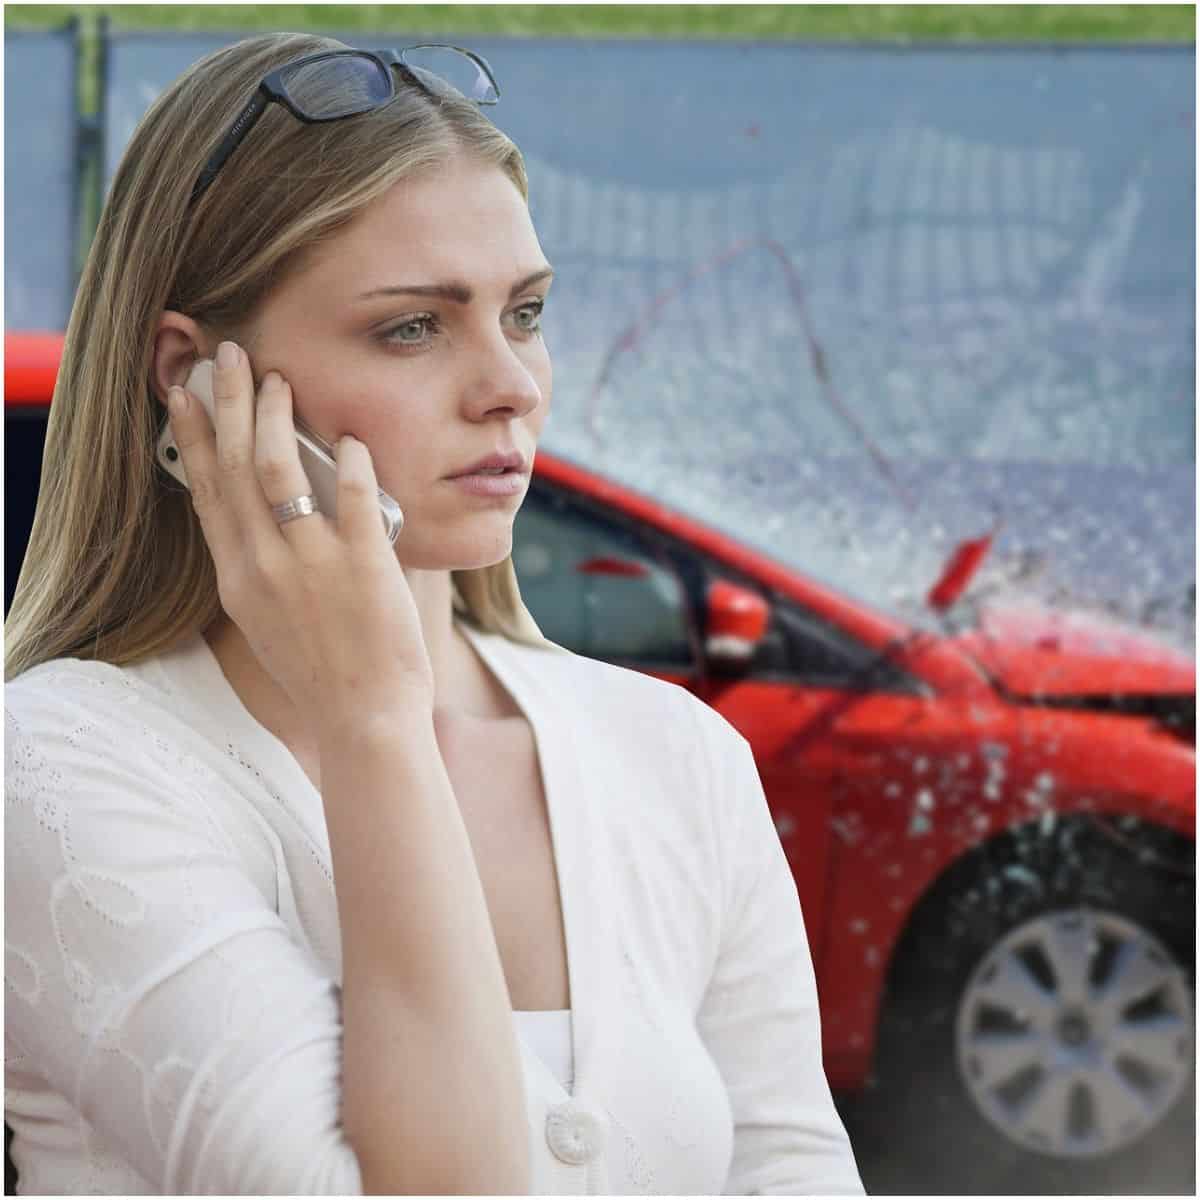 What is the spiritual meaning of a car accident